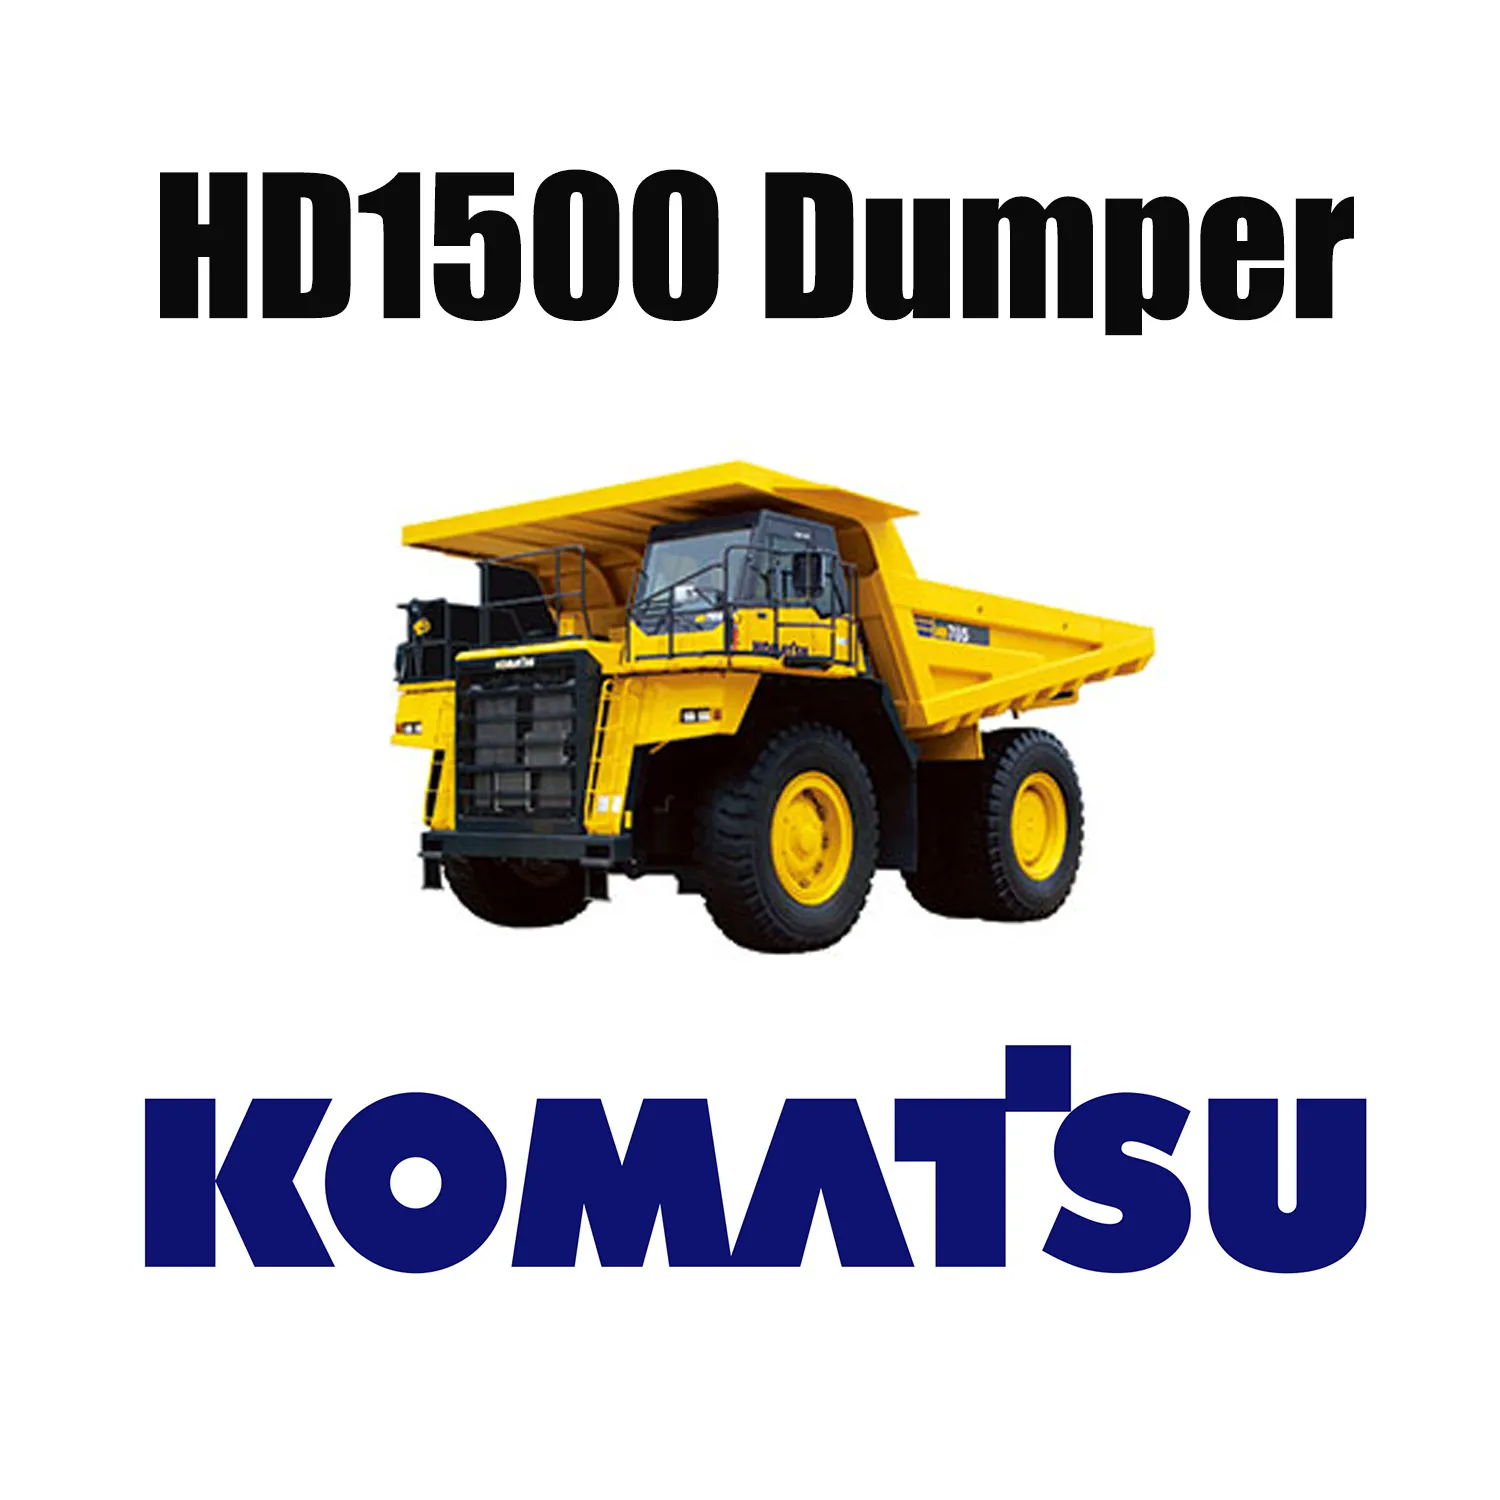 KOMATSU HD1500 Mechanical Truck fit with Specialty EarthMover Tires 33.00R51